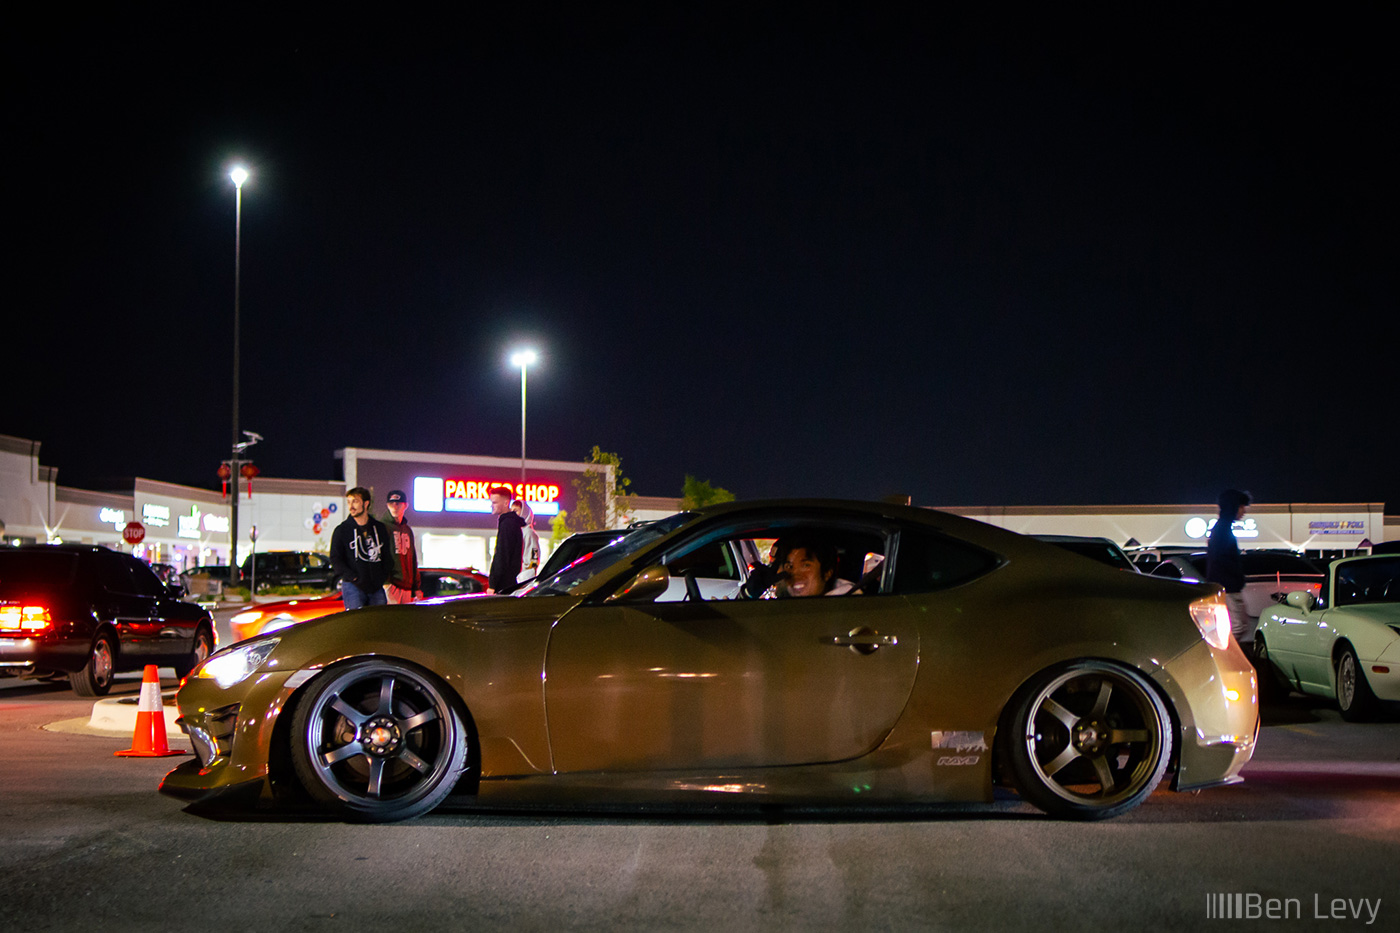 Brown ZN6 at Car Meet in Chicago Suburb